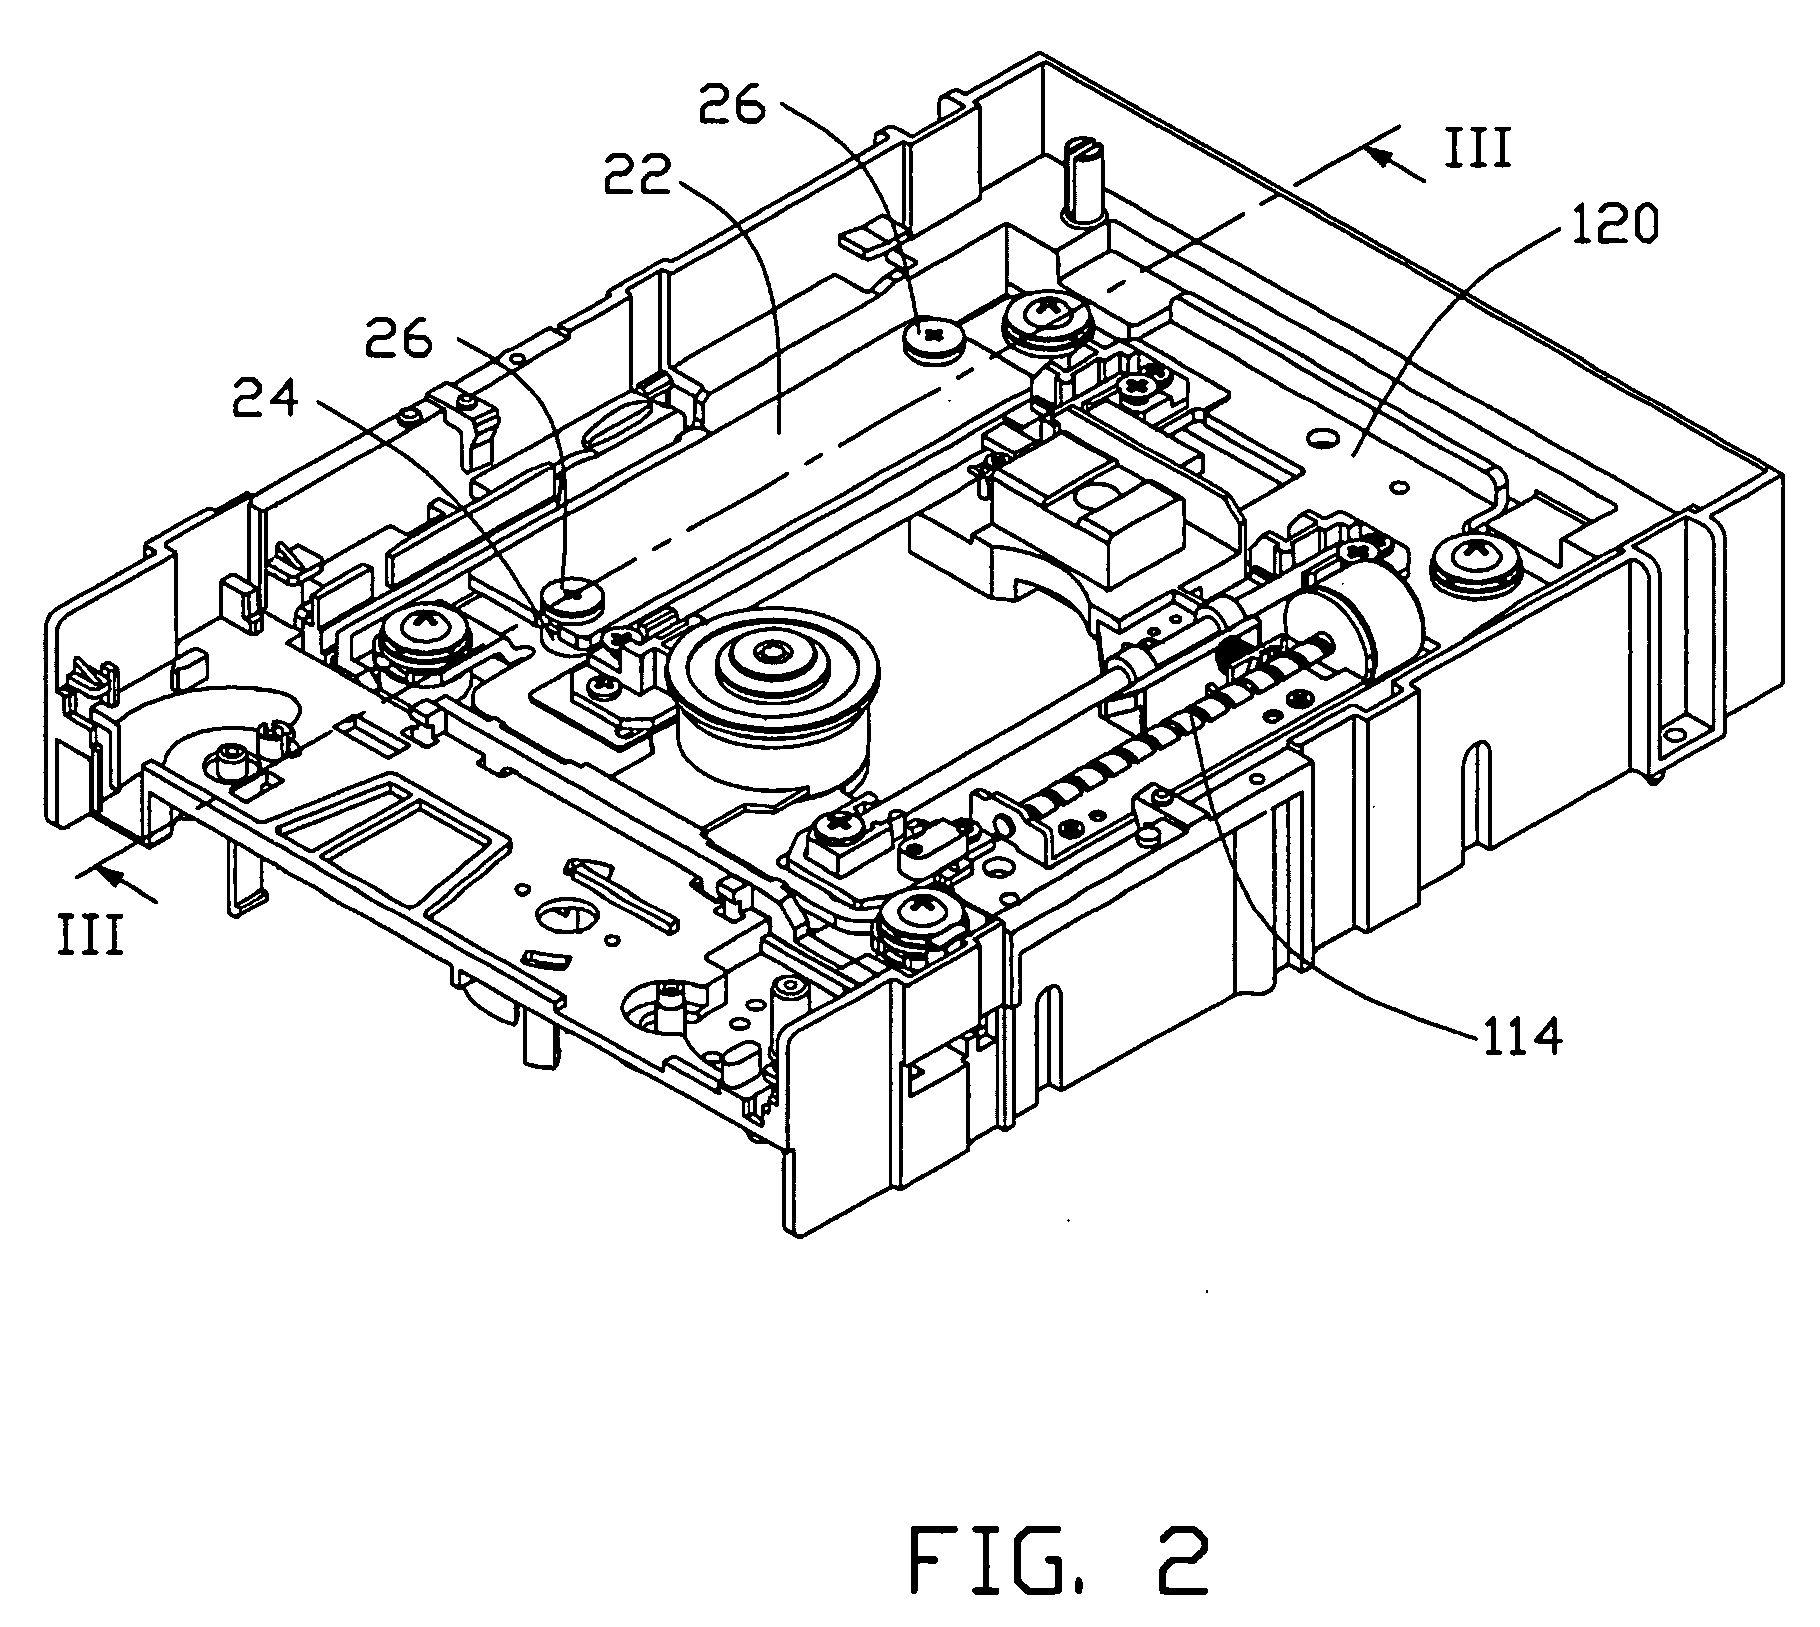 Vibration absorber system for an optical recording/reproducing apparatus